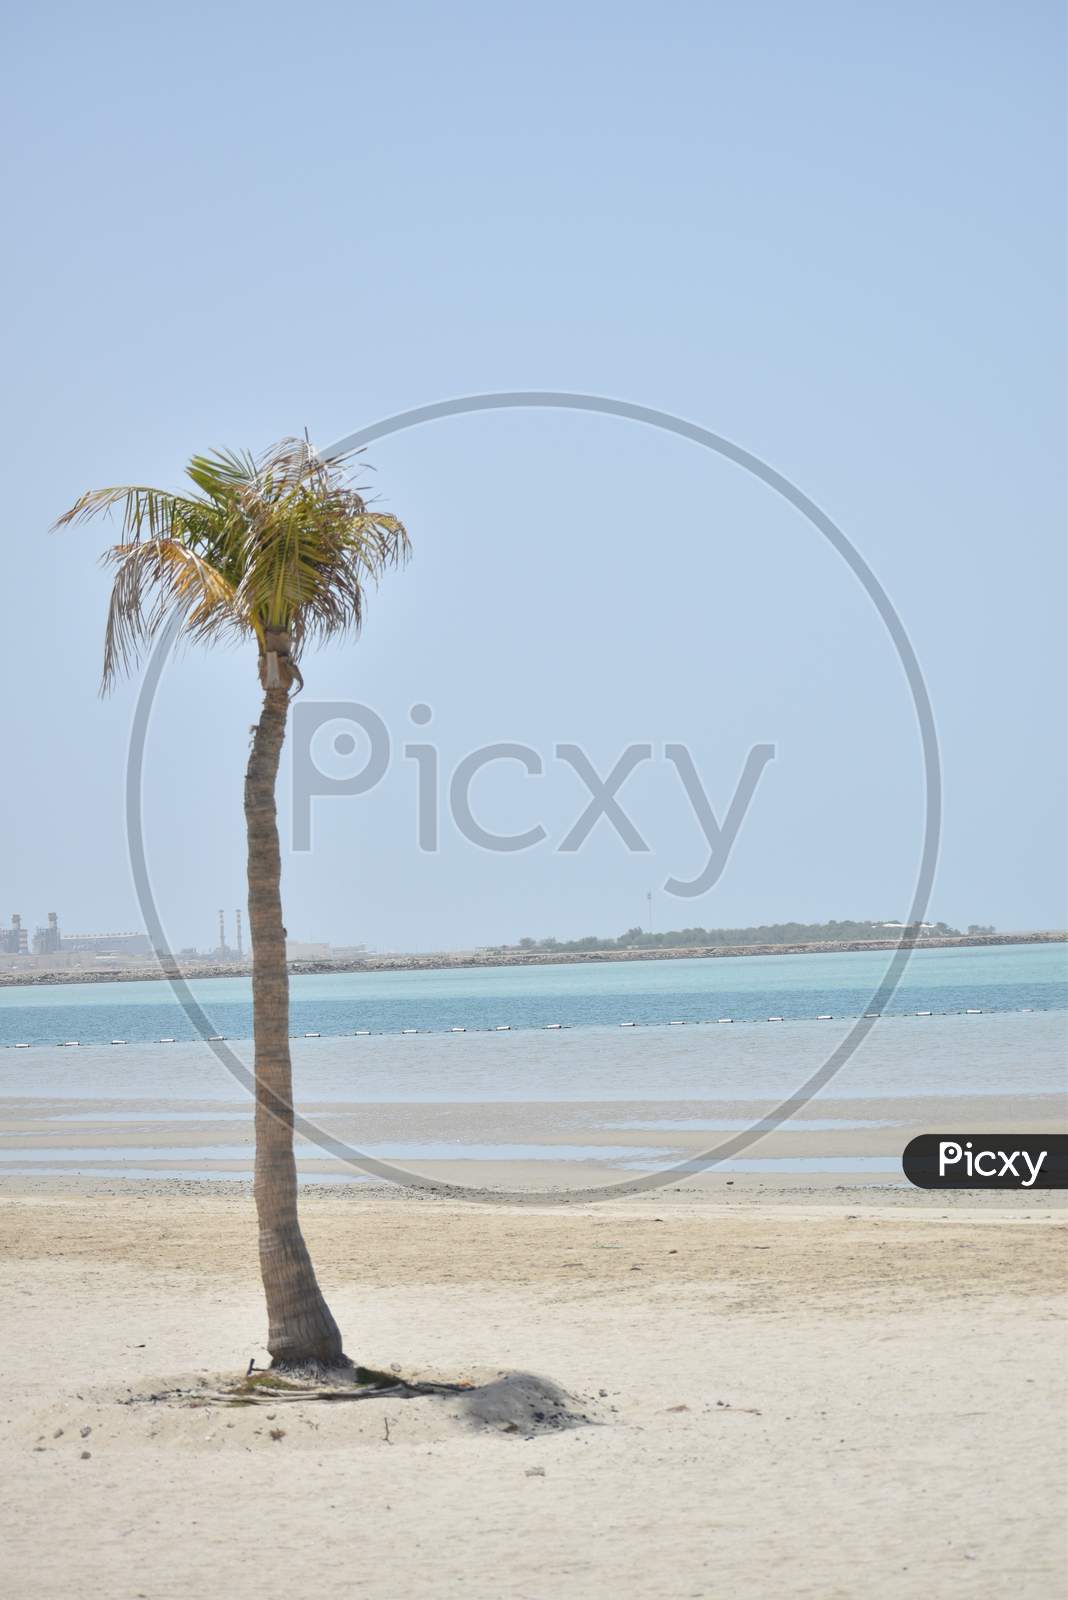 After Driving For About 90 Minutes From Abu Dhabi City Along E11, The Arterial Highway, You Can Reach Al Mirfa Beach.